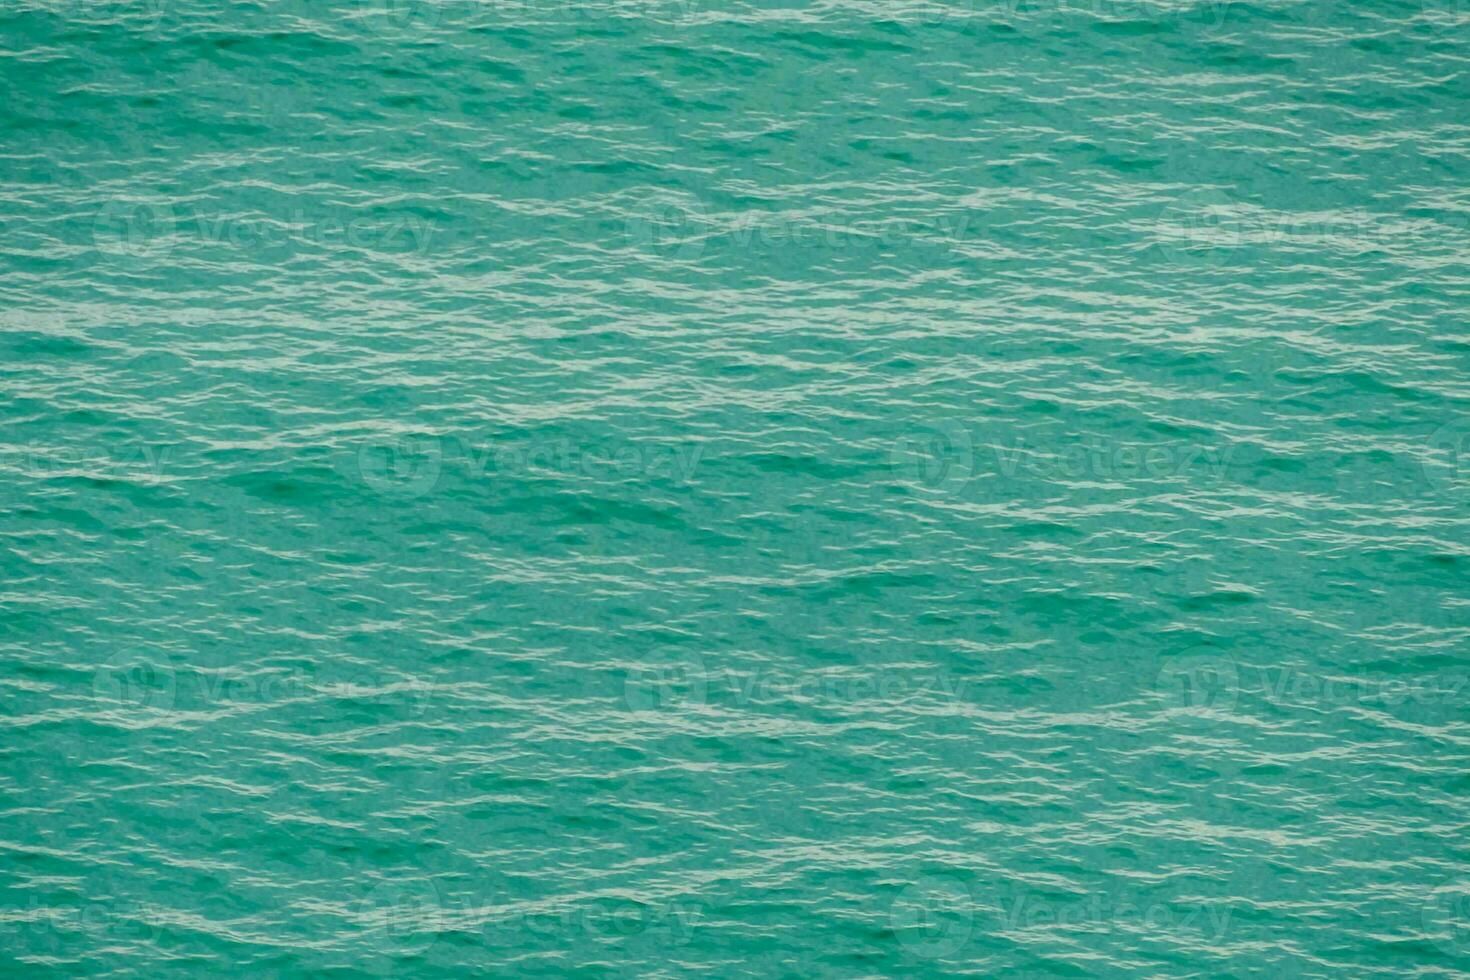 Ripples in the ocean photo